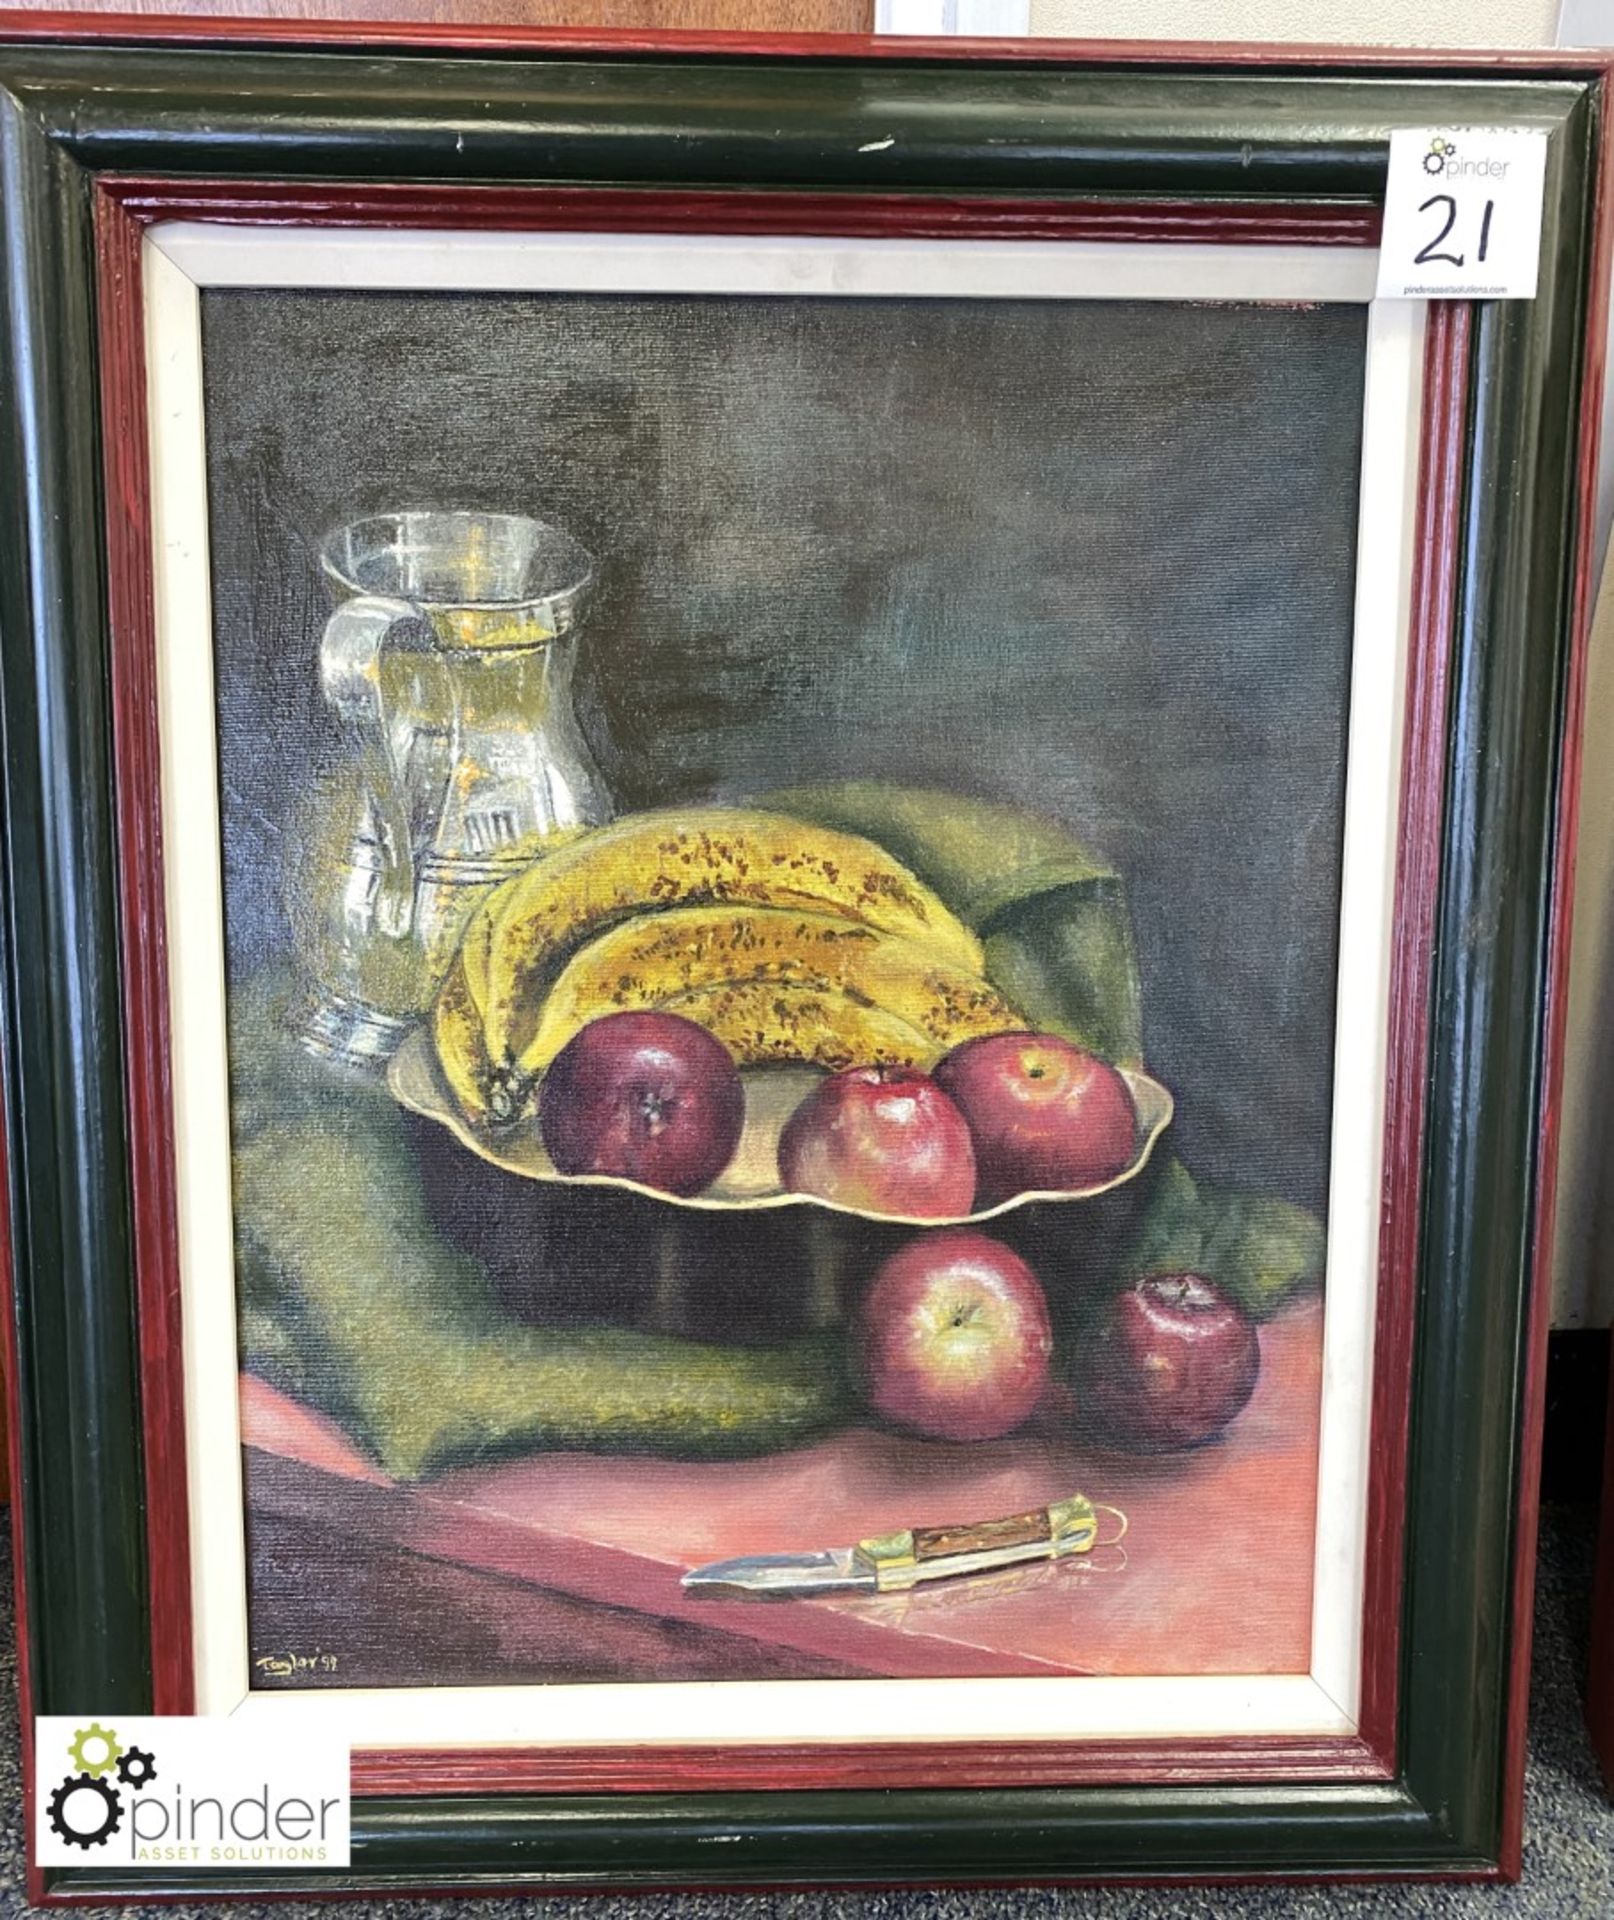 Framed Oil on Canvas “Pewter, Fruit and Knife” by Derek Alfred Taylor, 550mm x 660mm